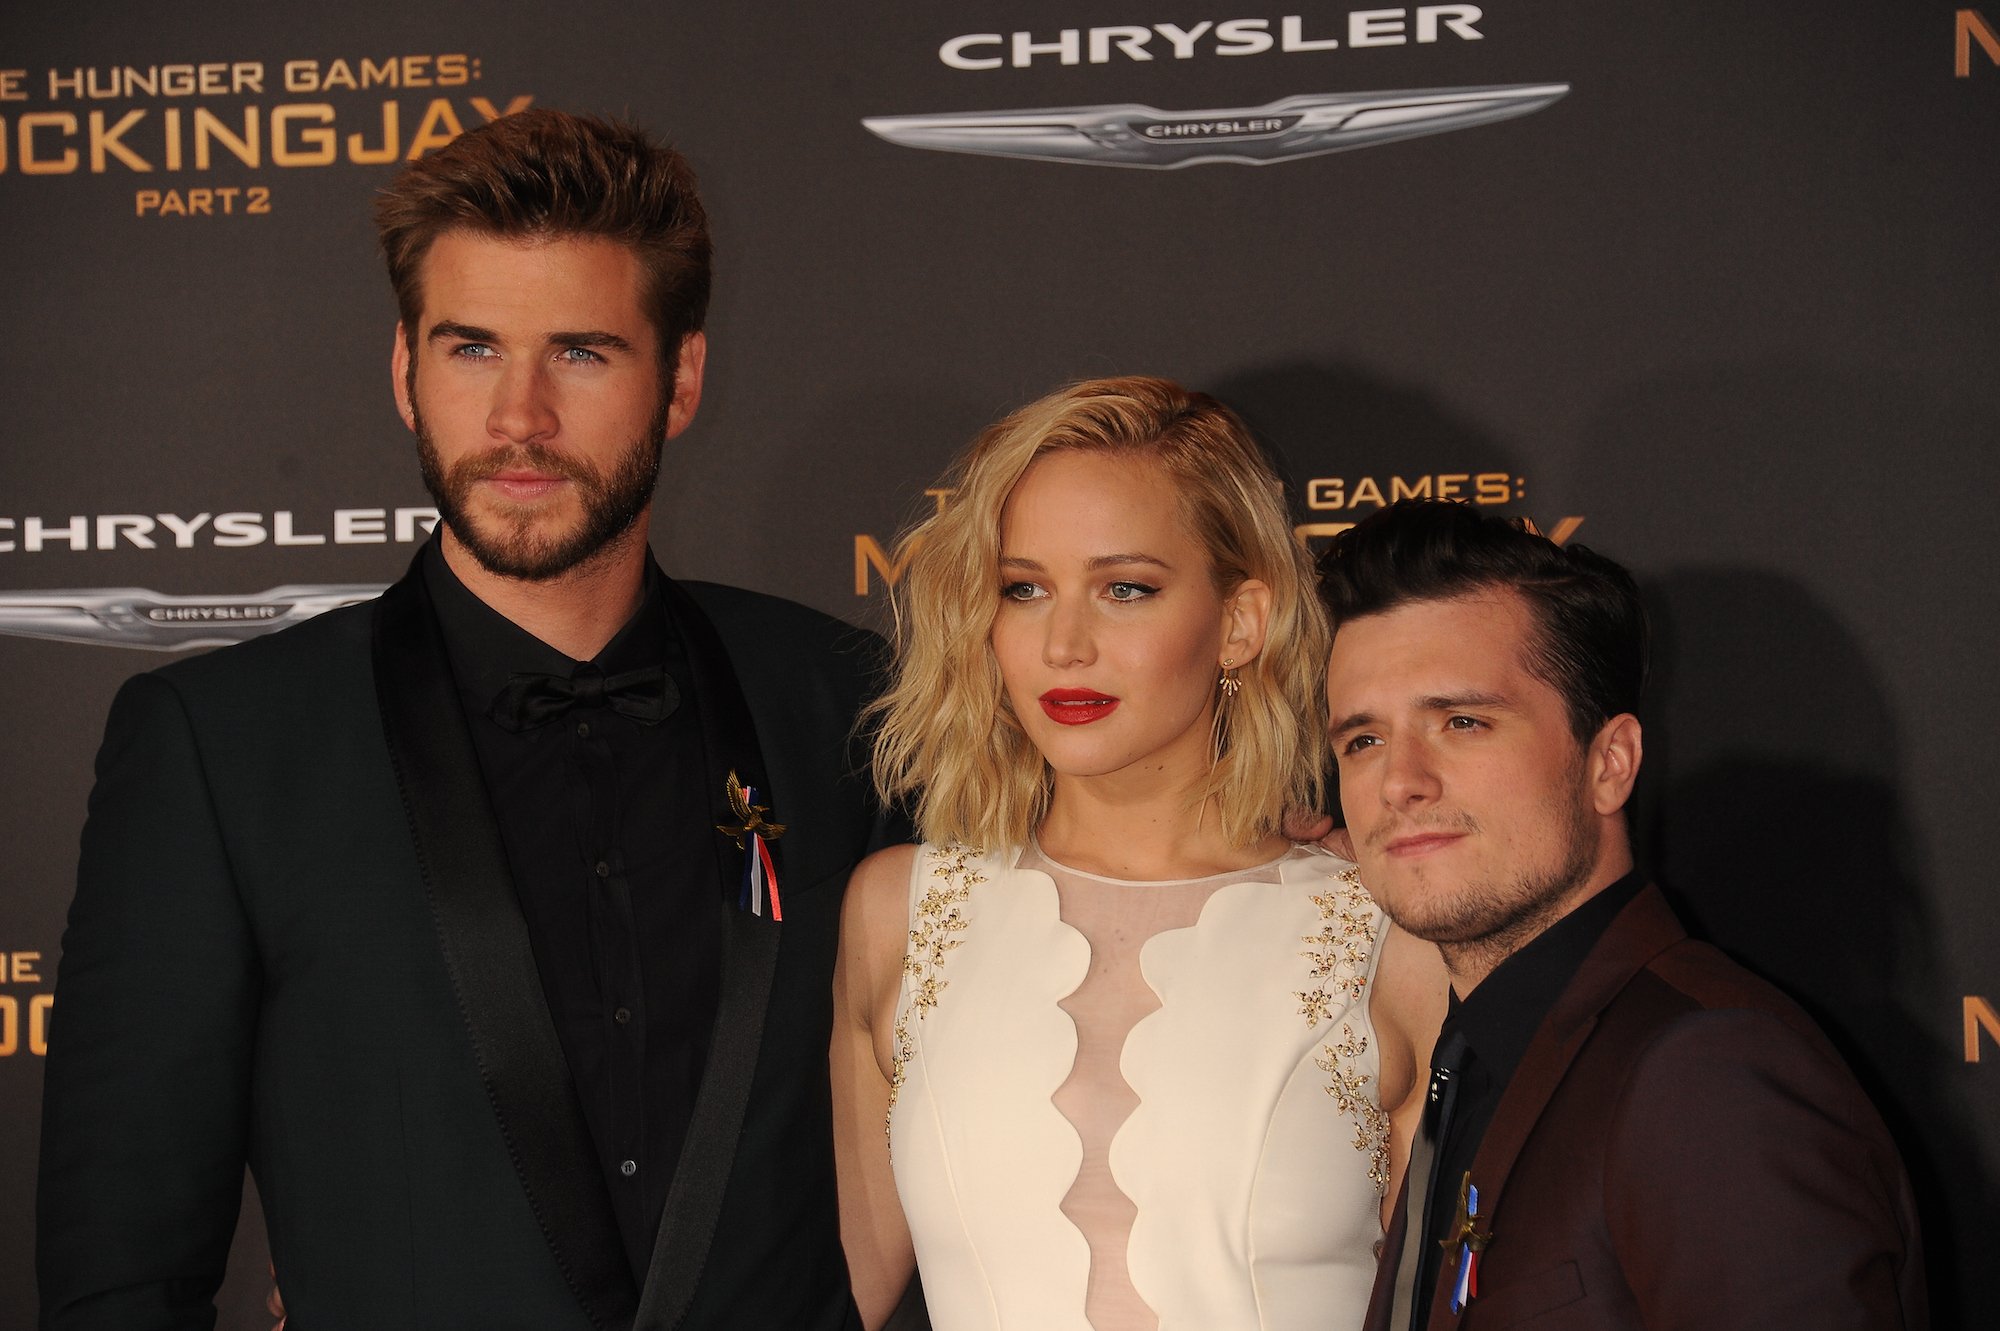 Liam Hemsworth, Jennifer Lawrence, and Josh Hutcherson at the premiere of 'The Hunger Games: Mockingjay - Part 2' at the Microsoft Theater.